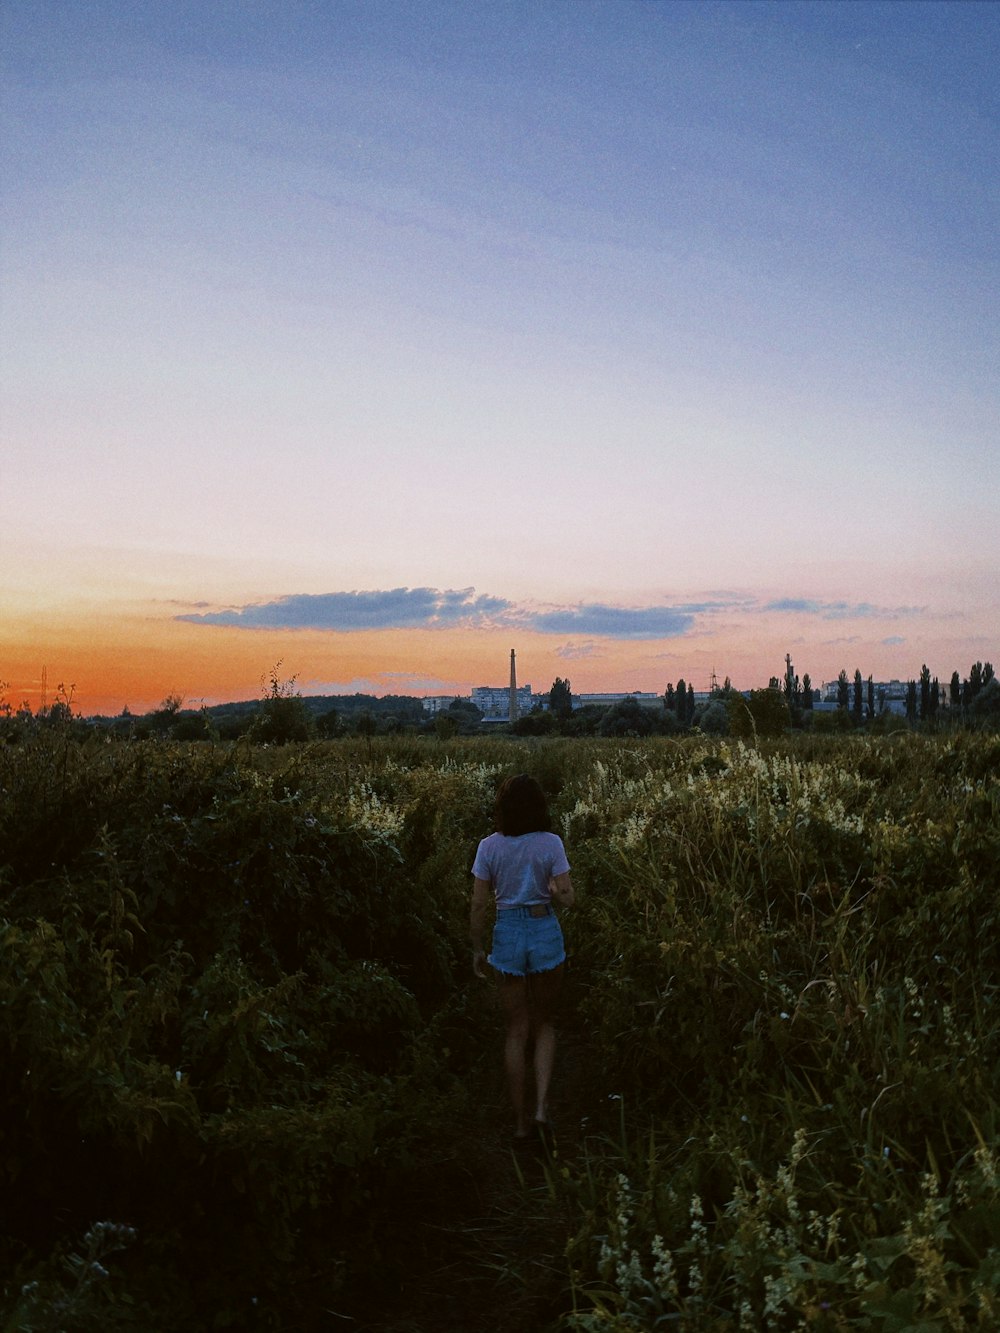 a person walking through a field at sunset